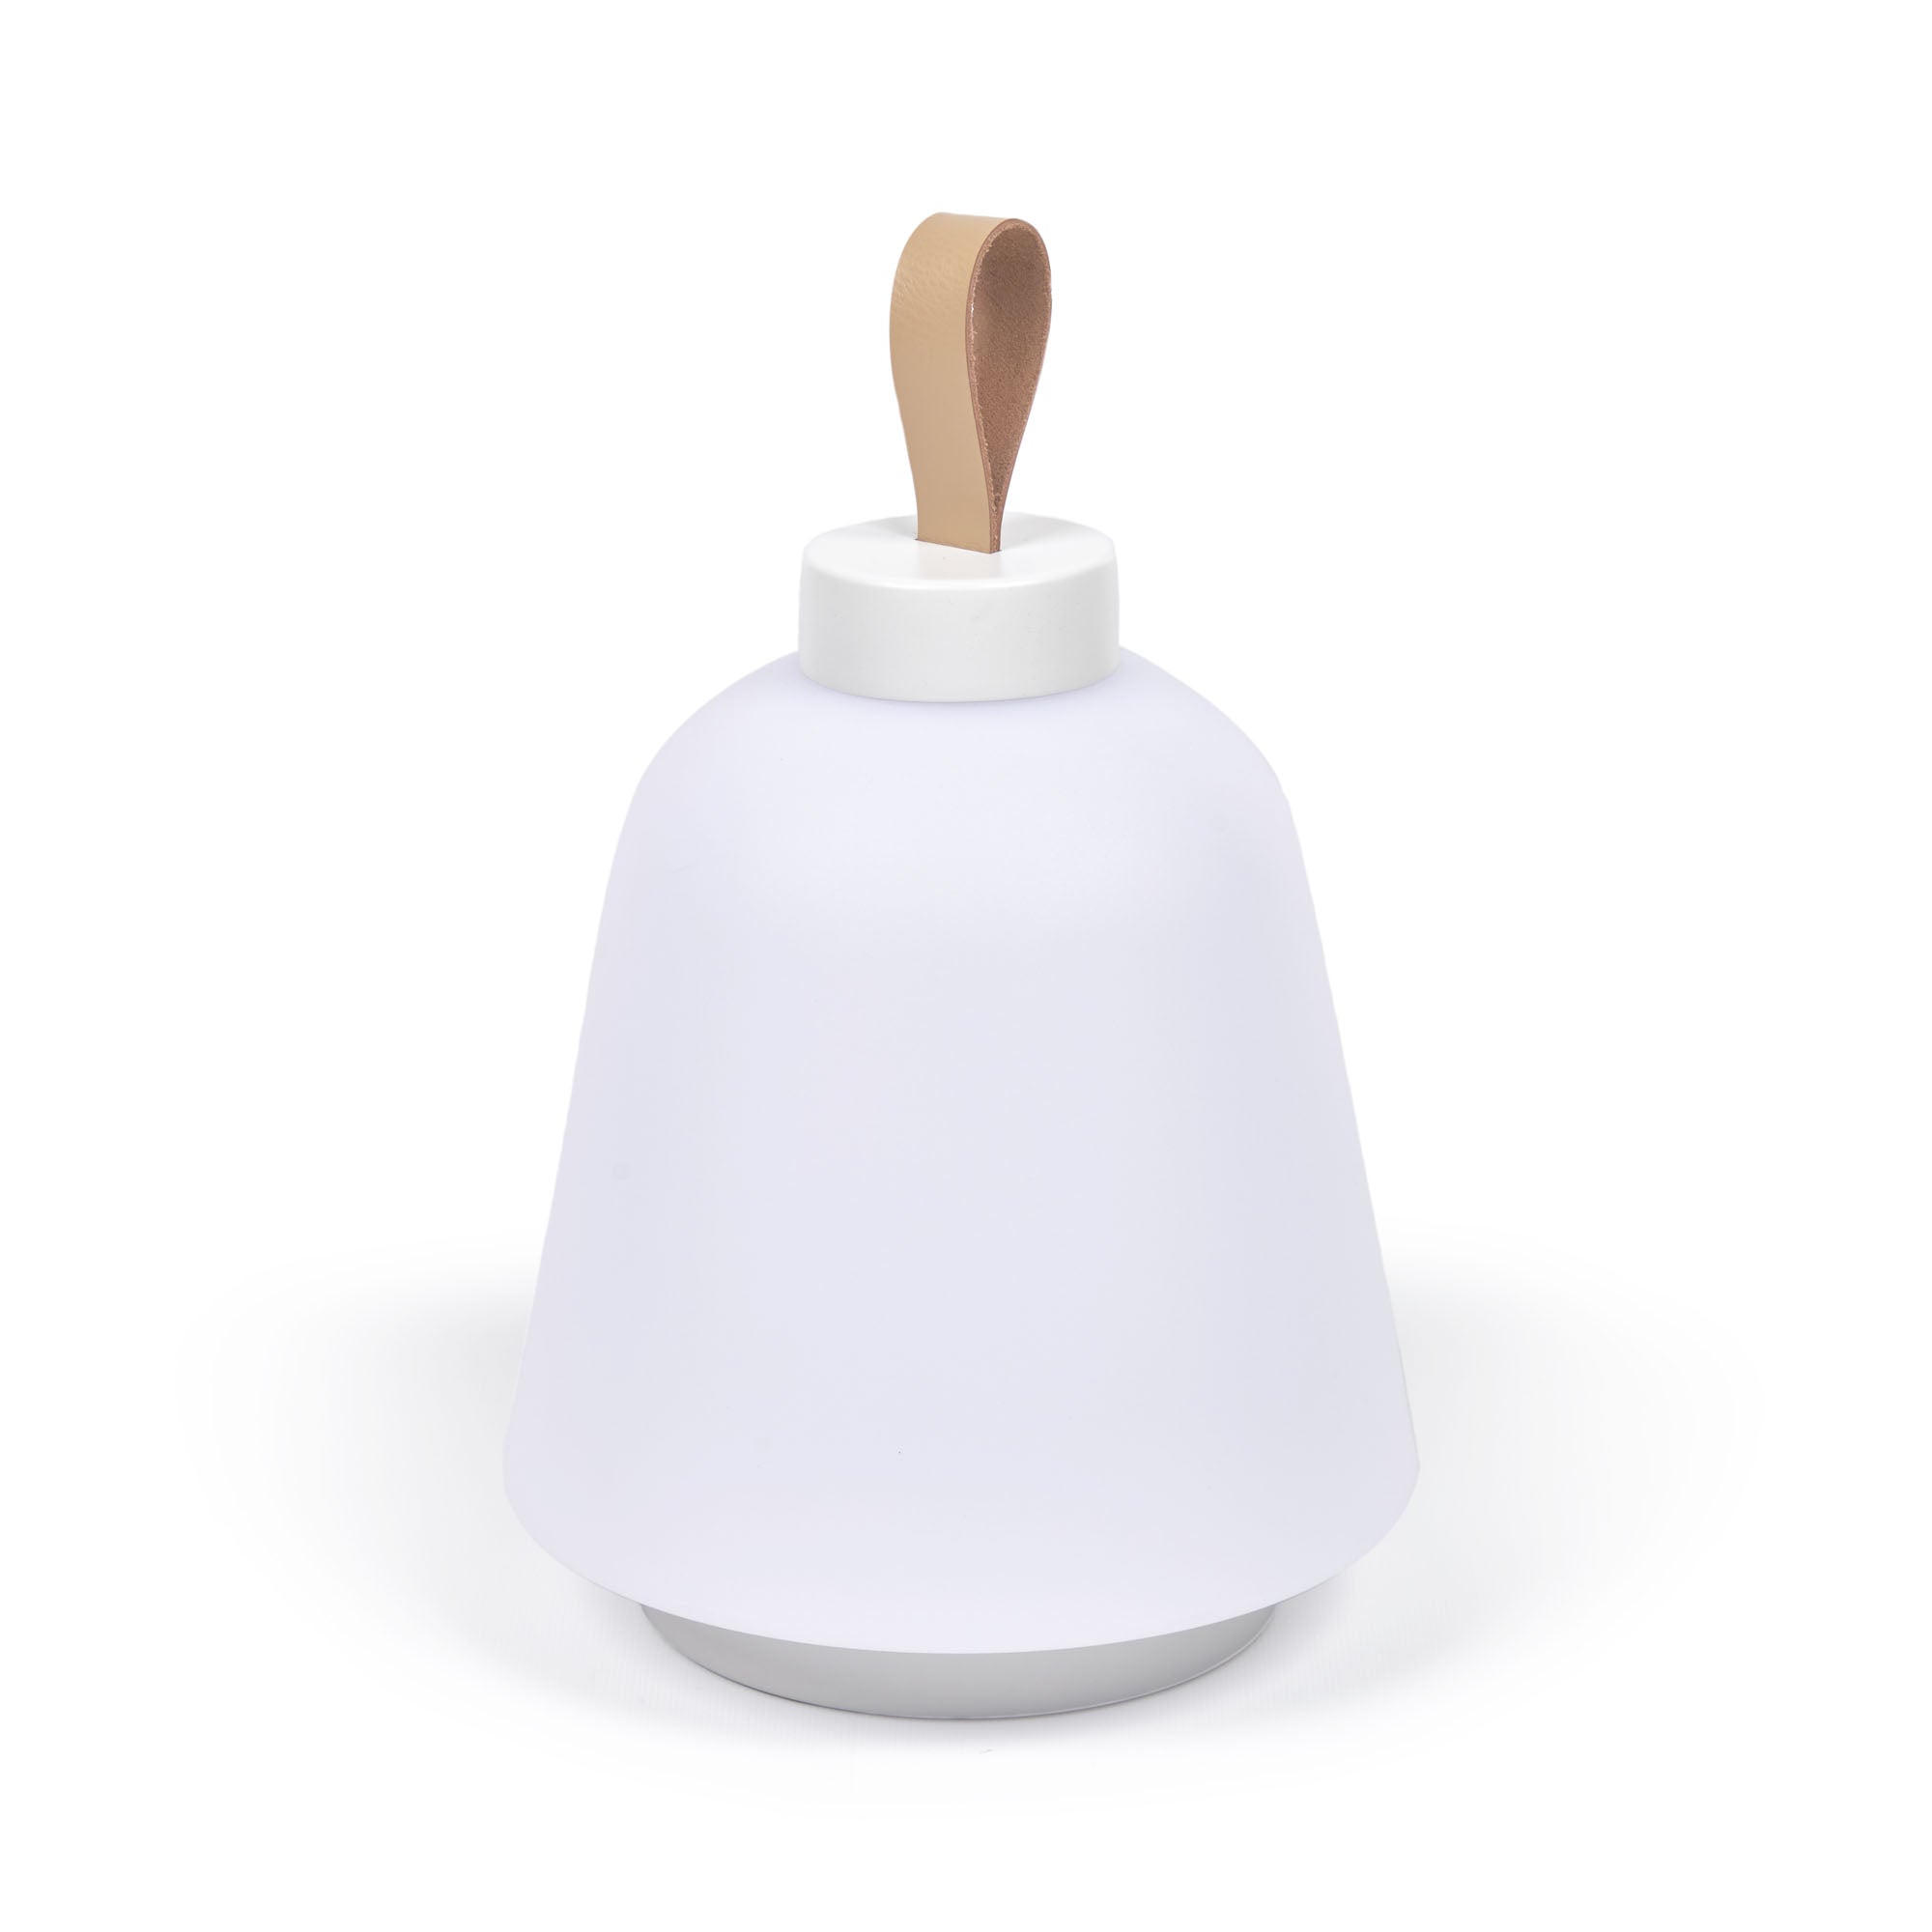 Udiya table lamp in polythene and metal white with white finish